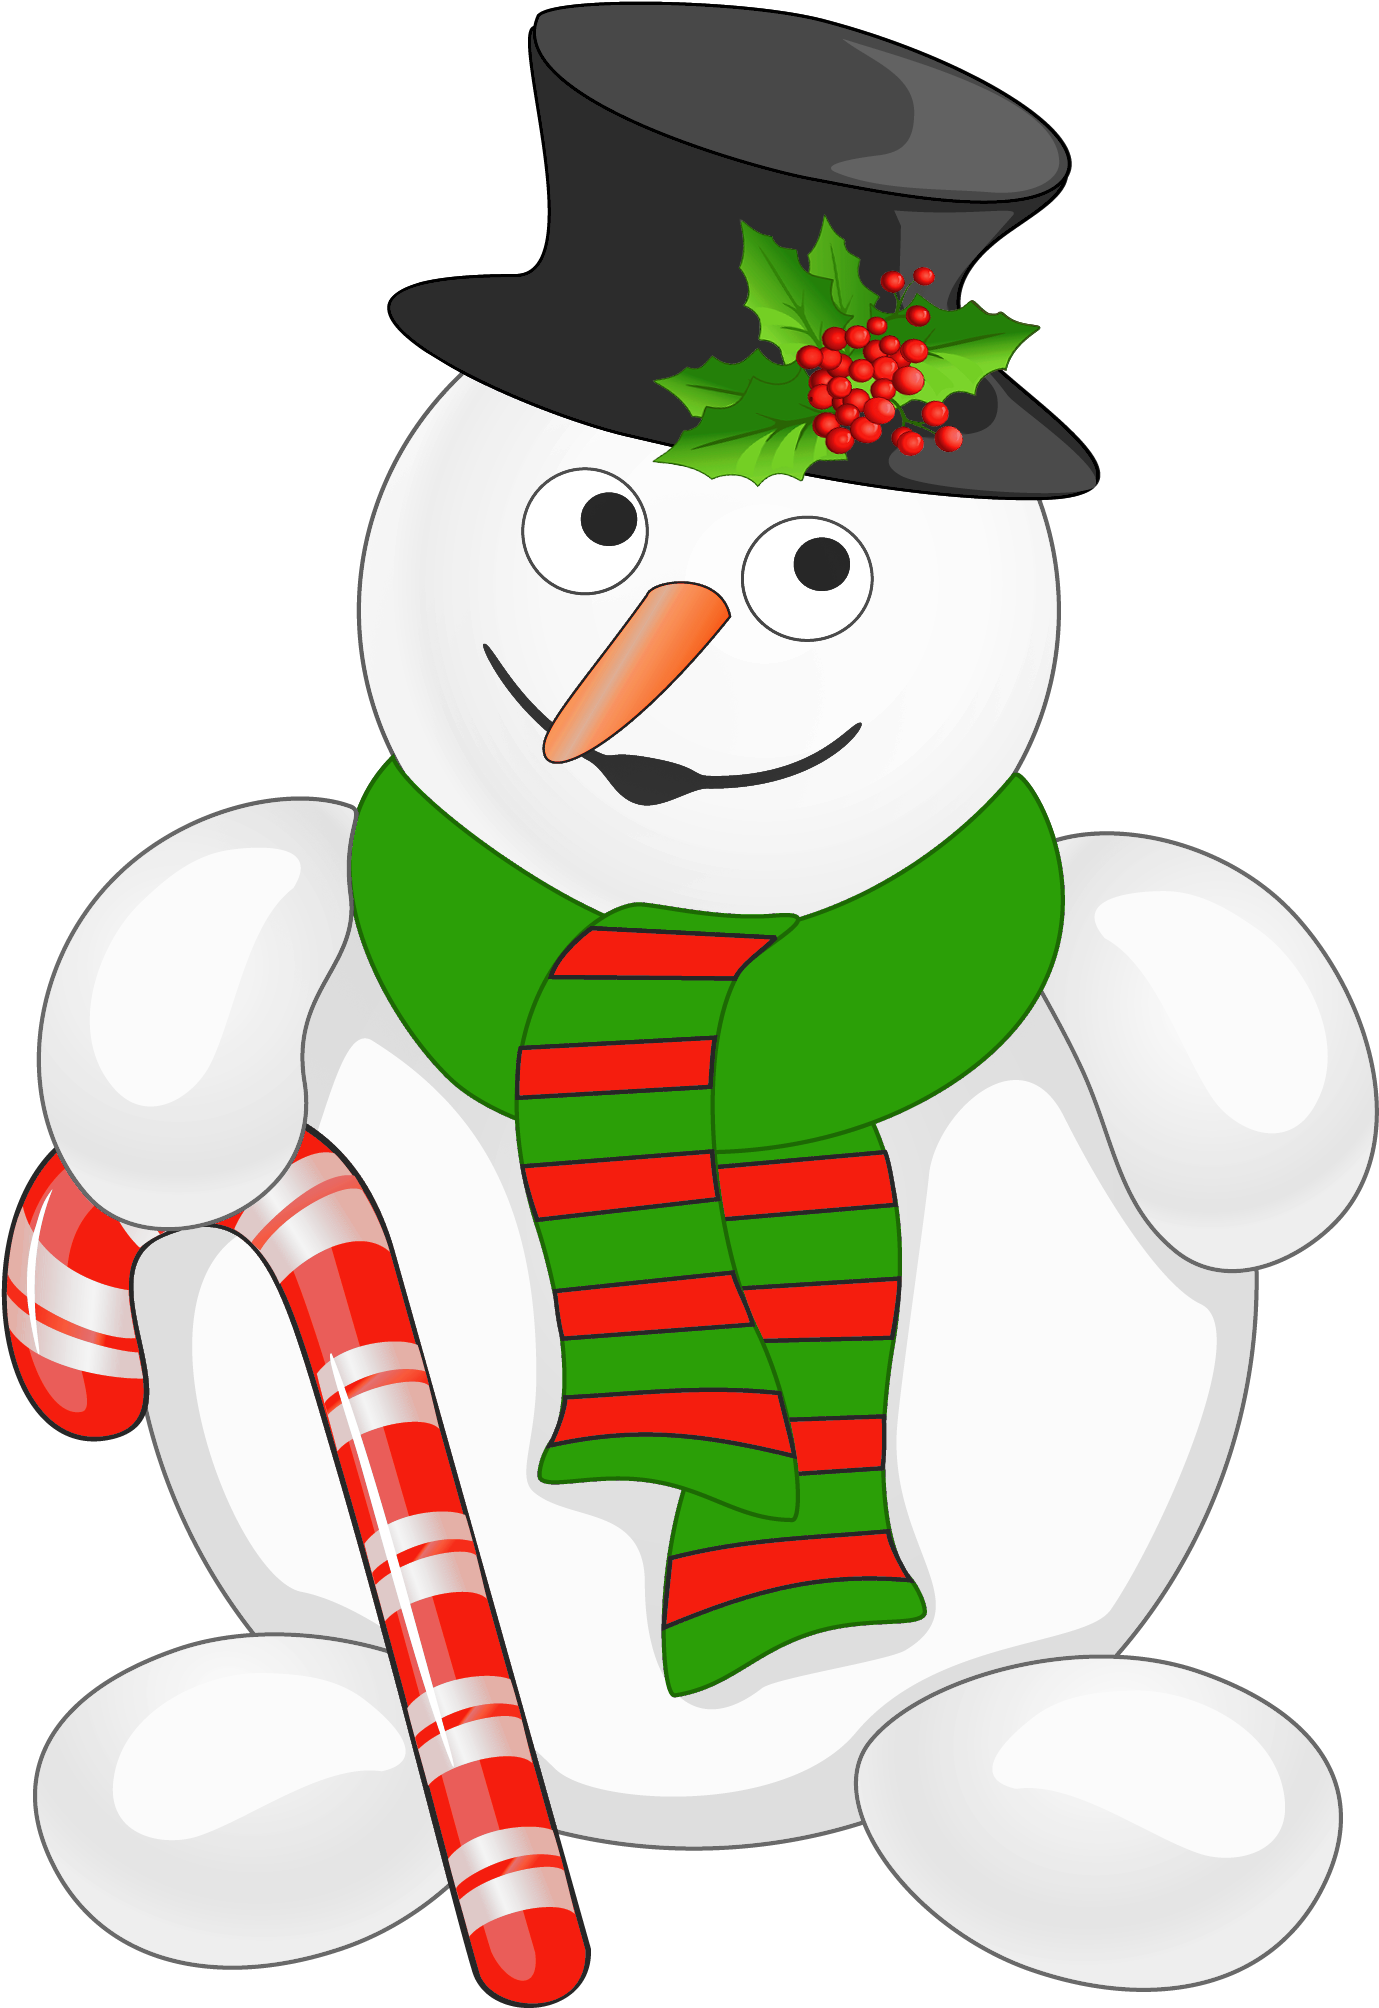 Free Candy Cane Clipart Public Domain Christmas Clip - Snowman With Candy Cane (1424x2028)